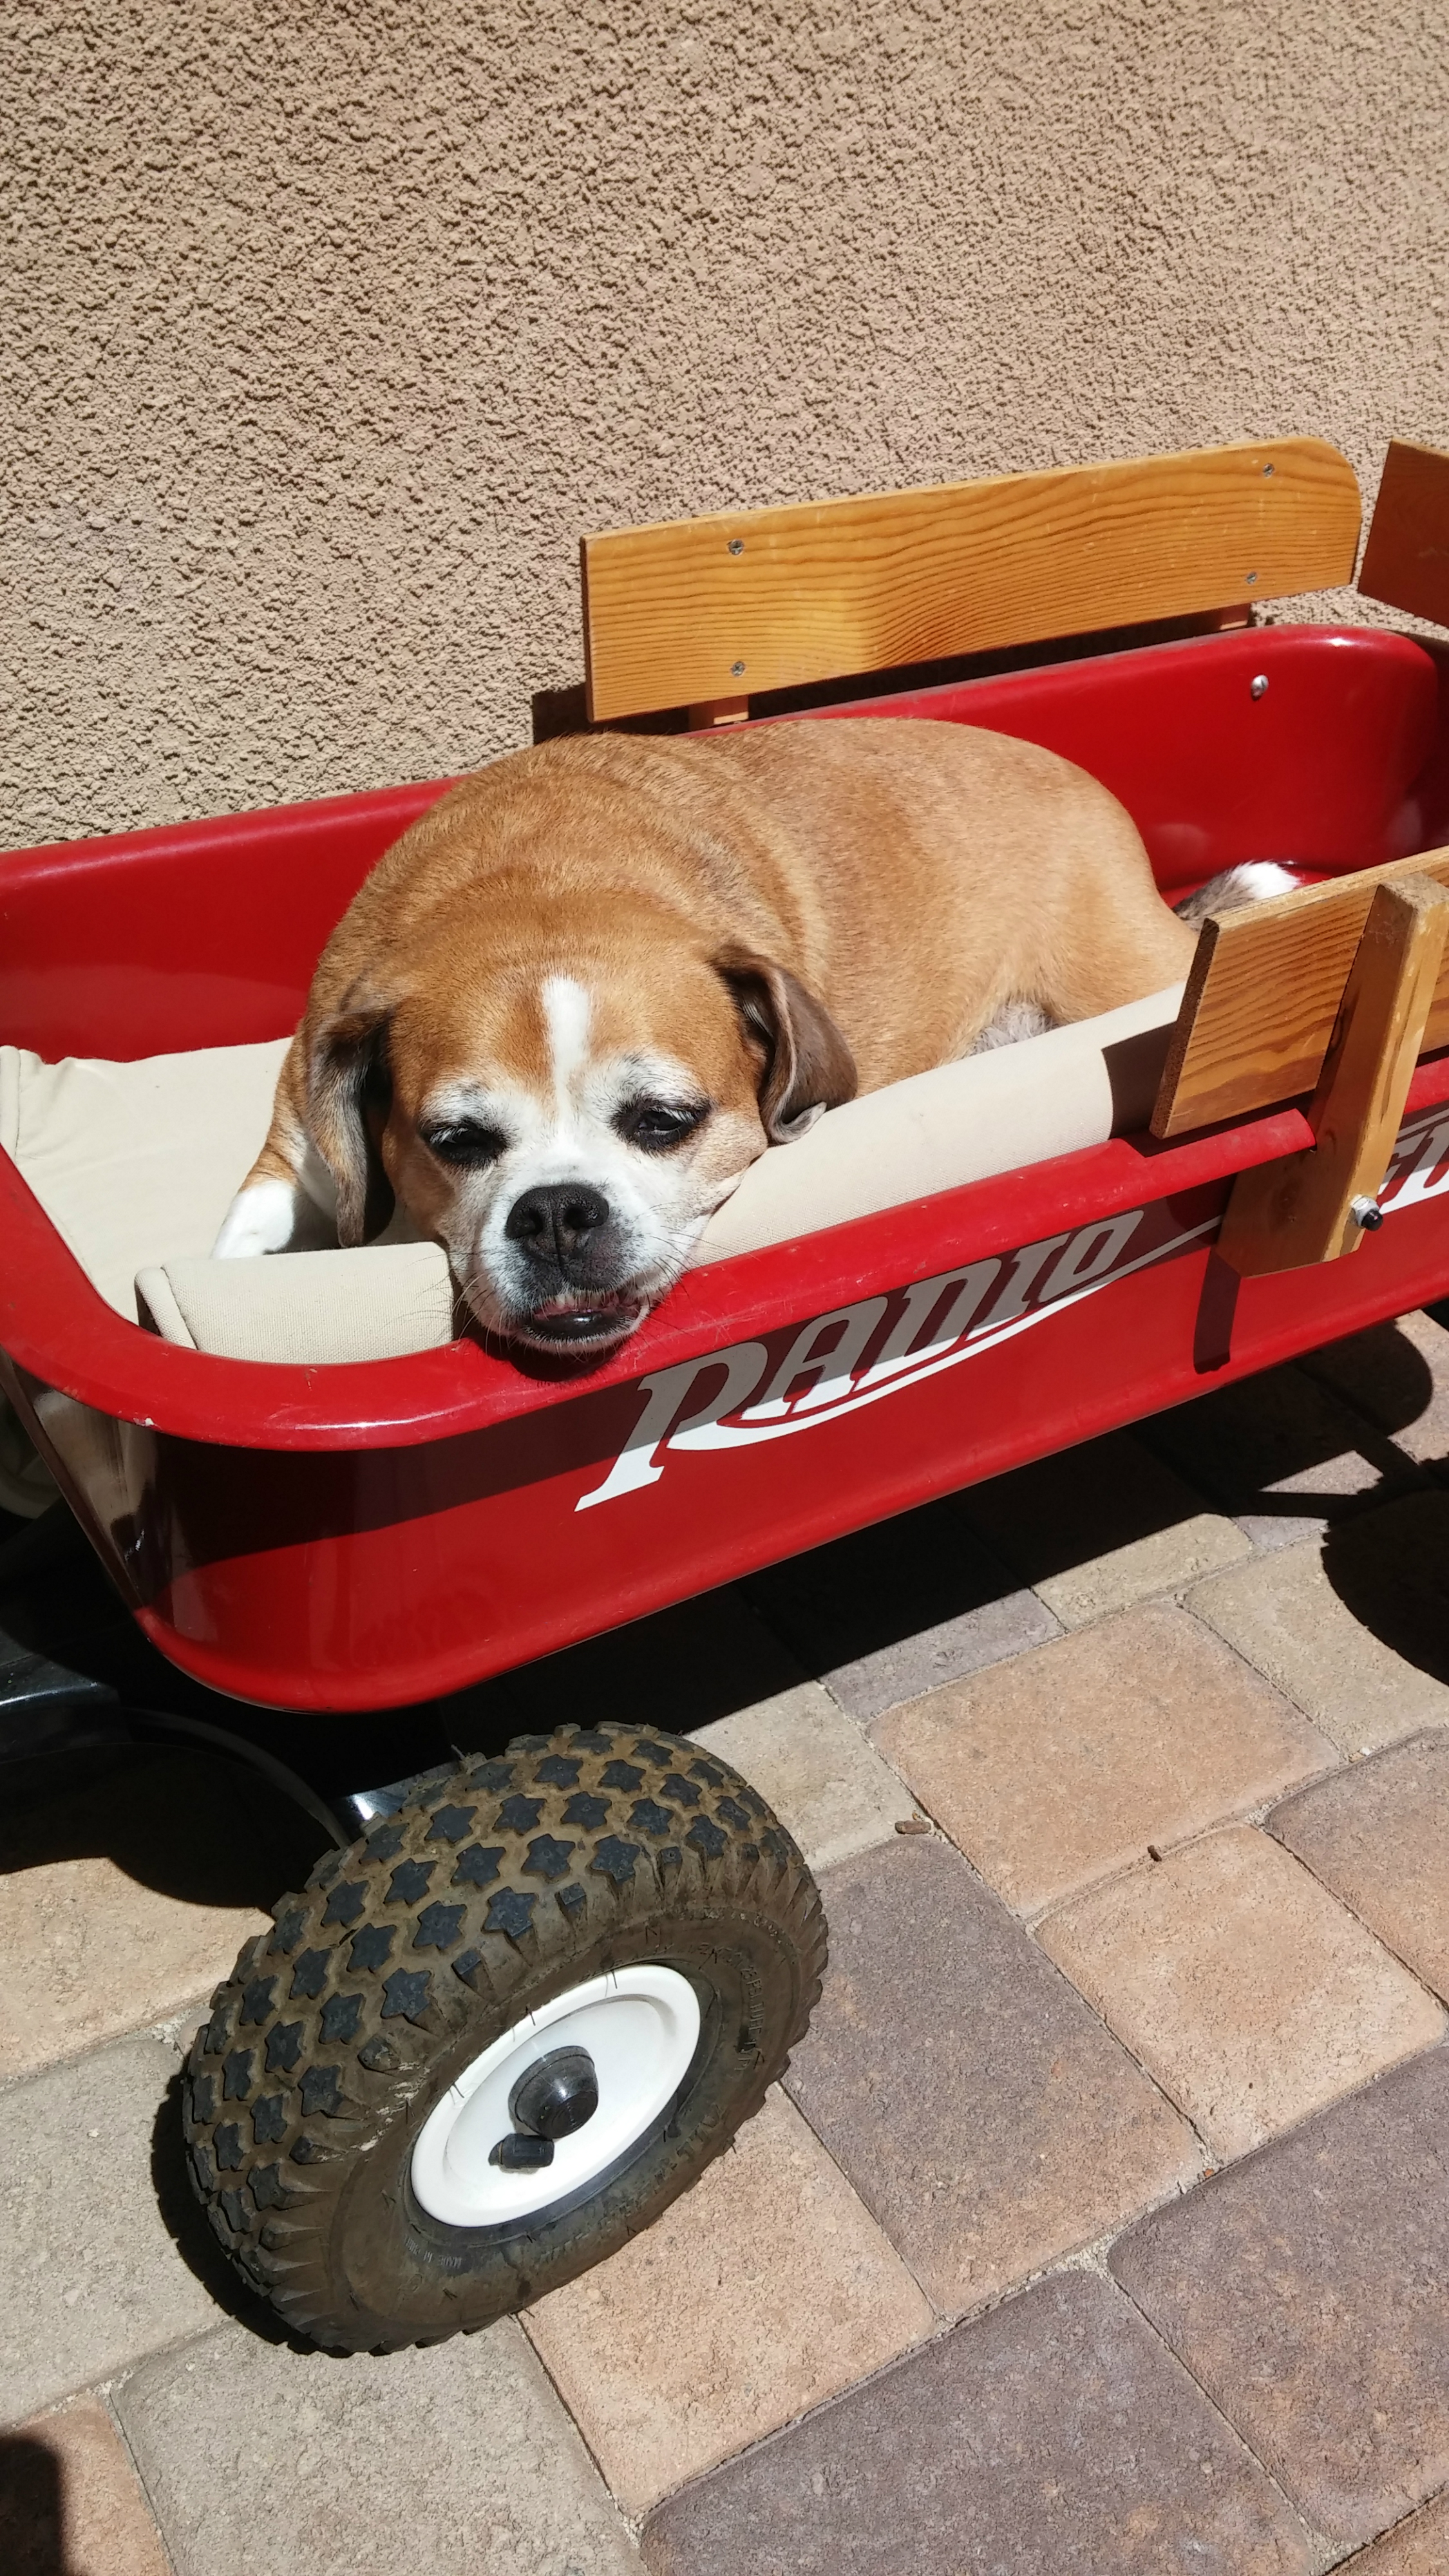 Patches in a wagon